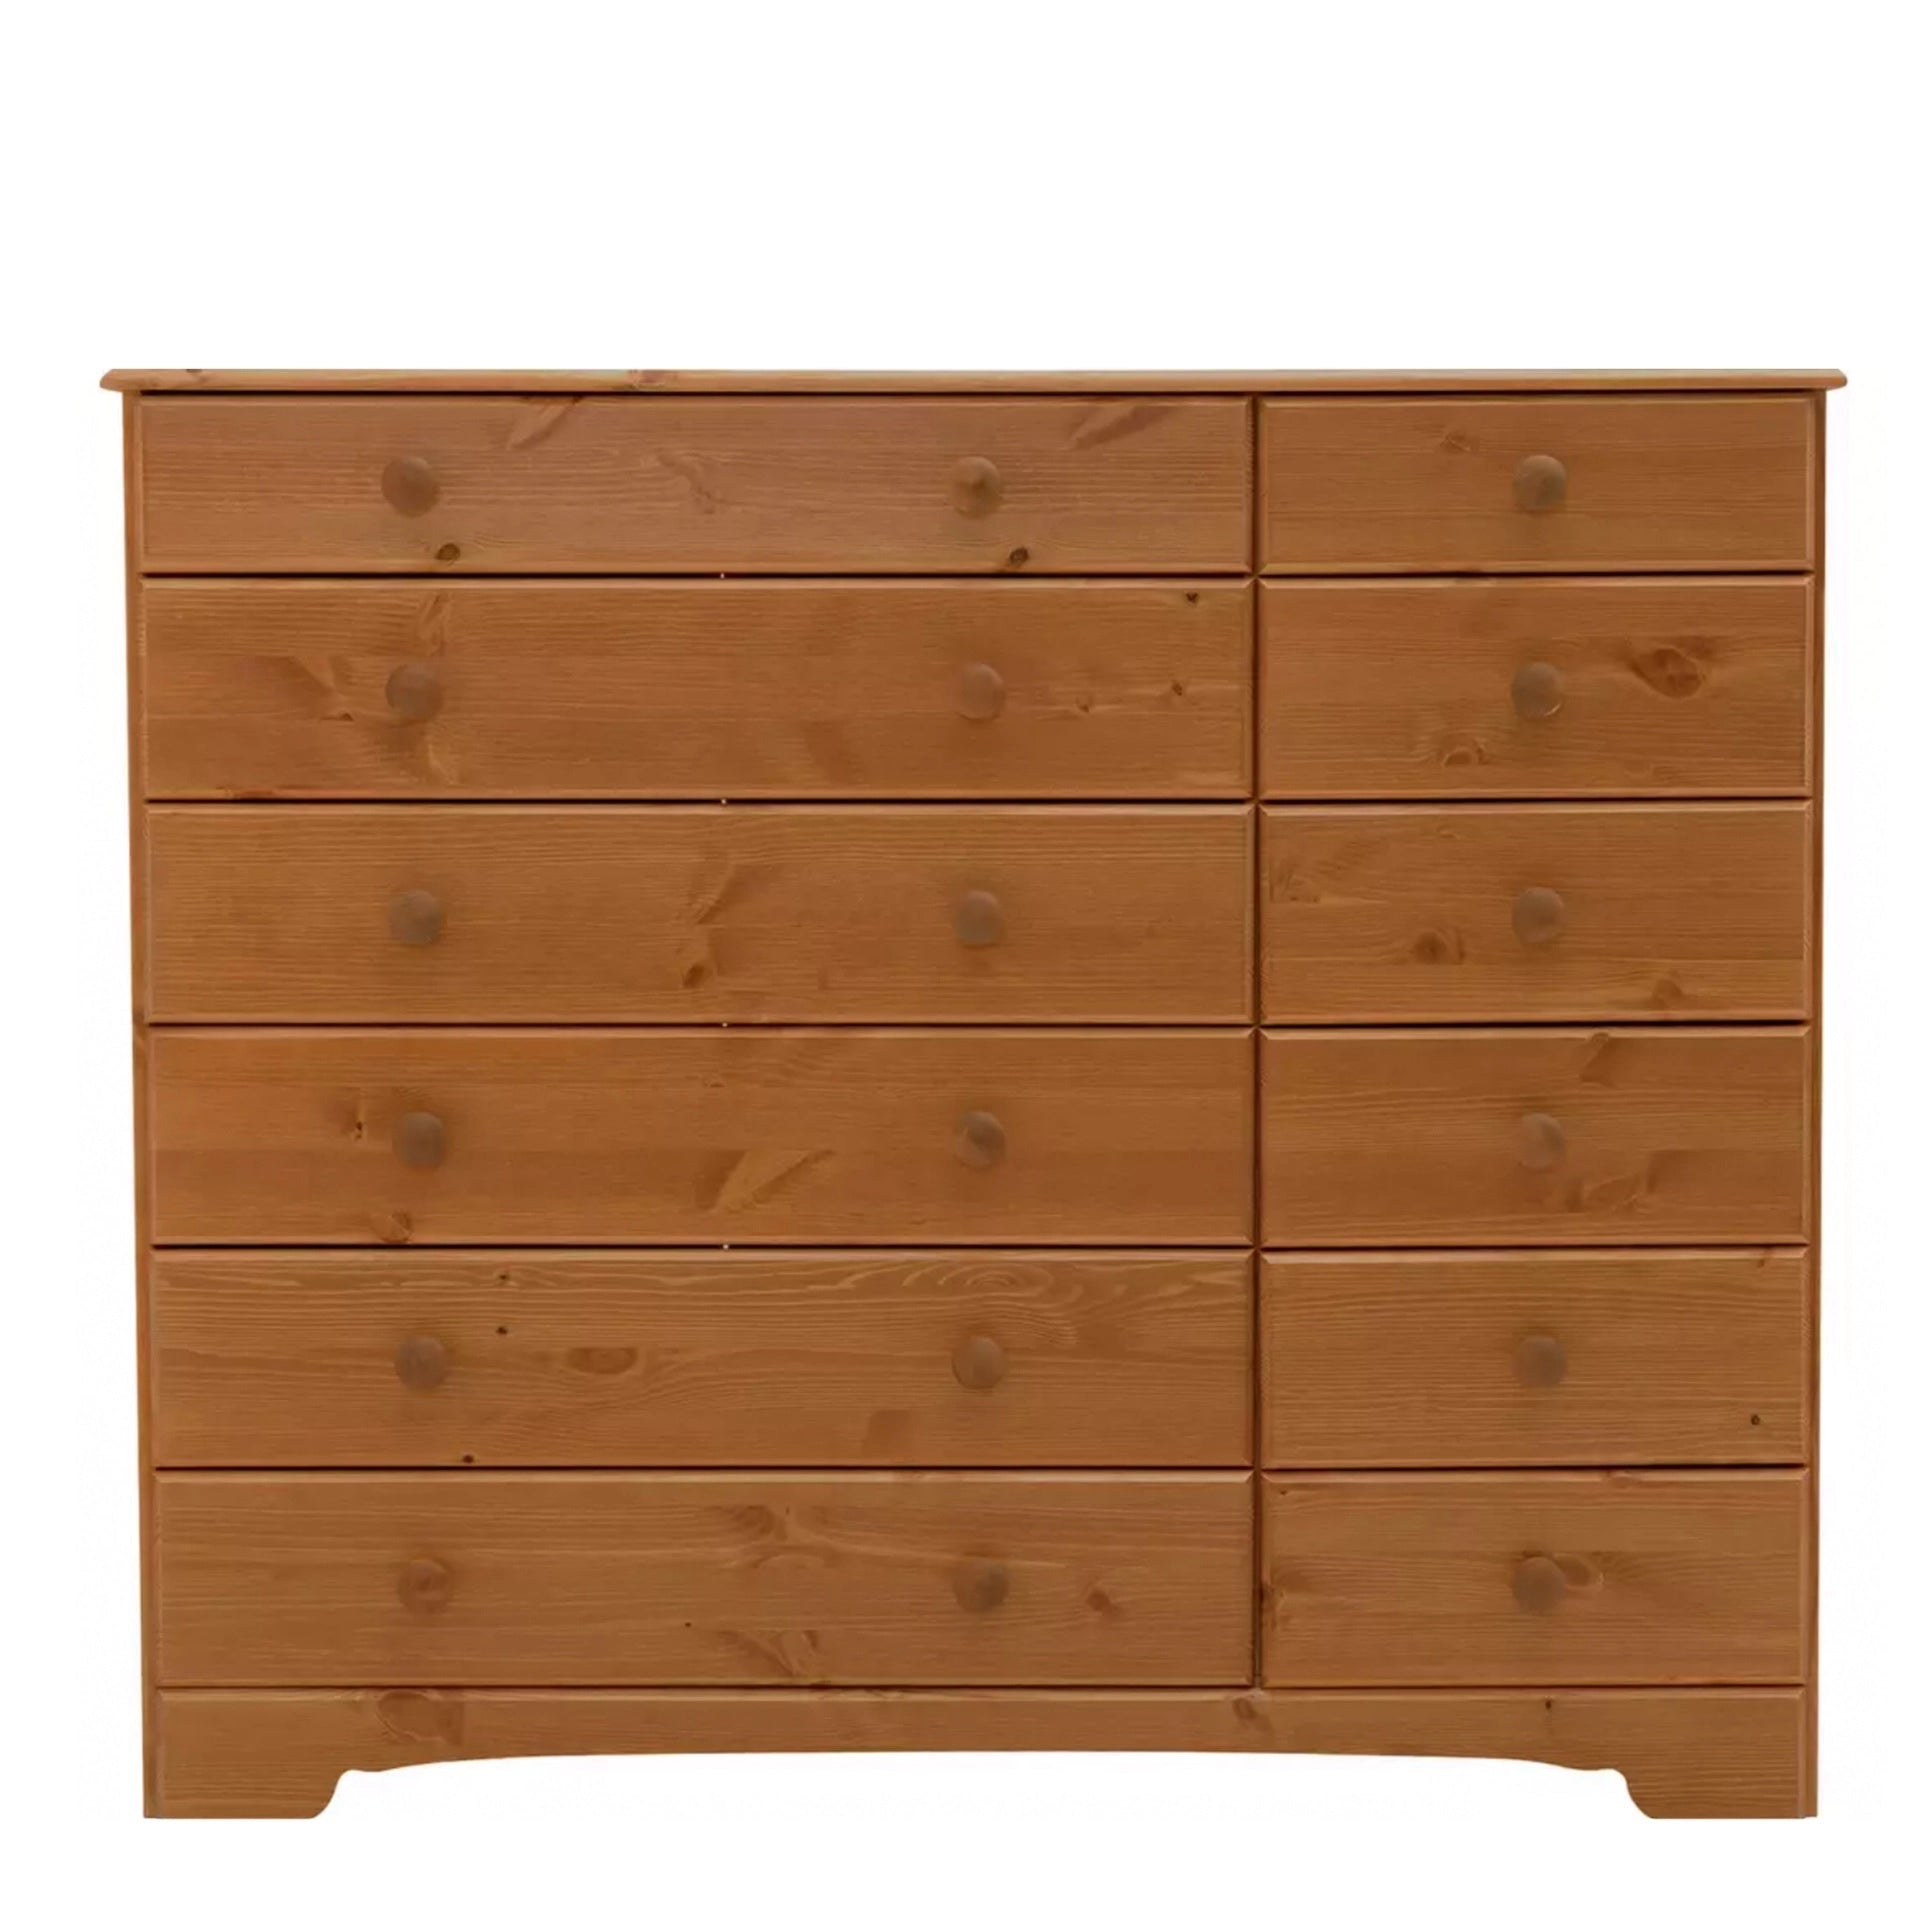 Furniture To Go Nordic Chest of Drawers 6+6 Drawers, Cherry